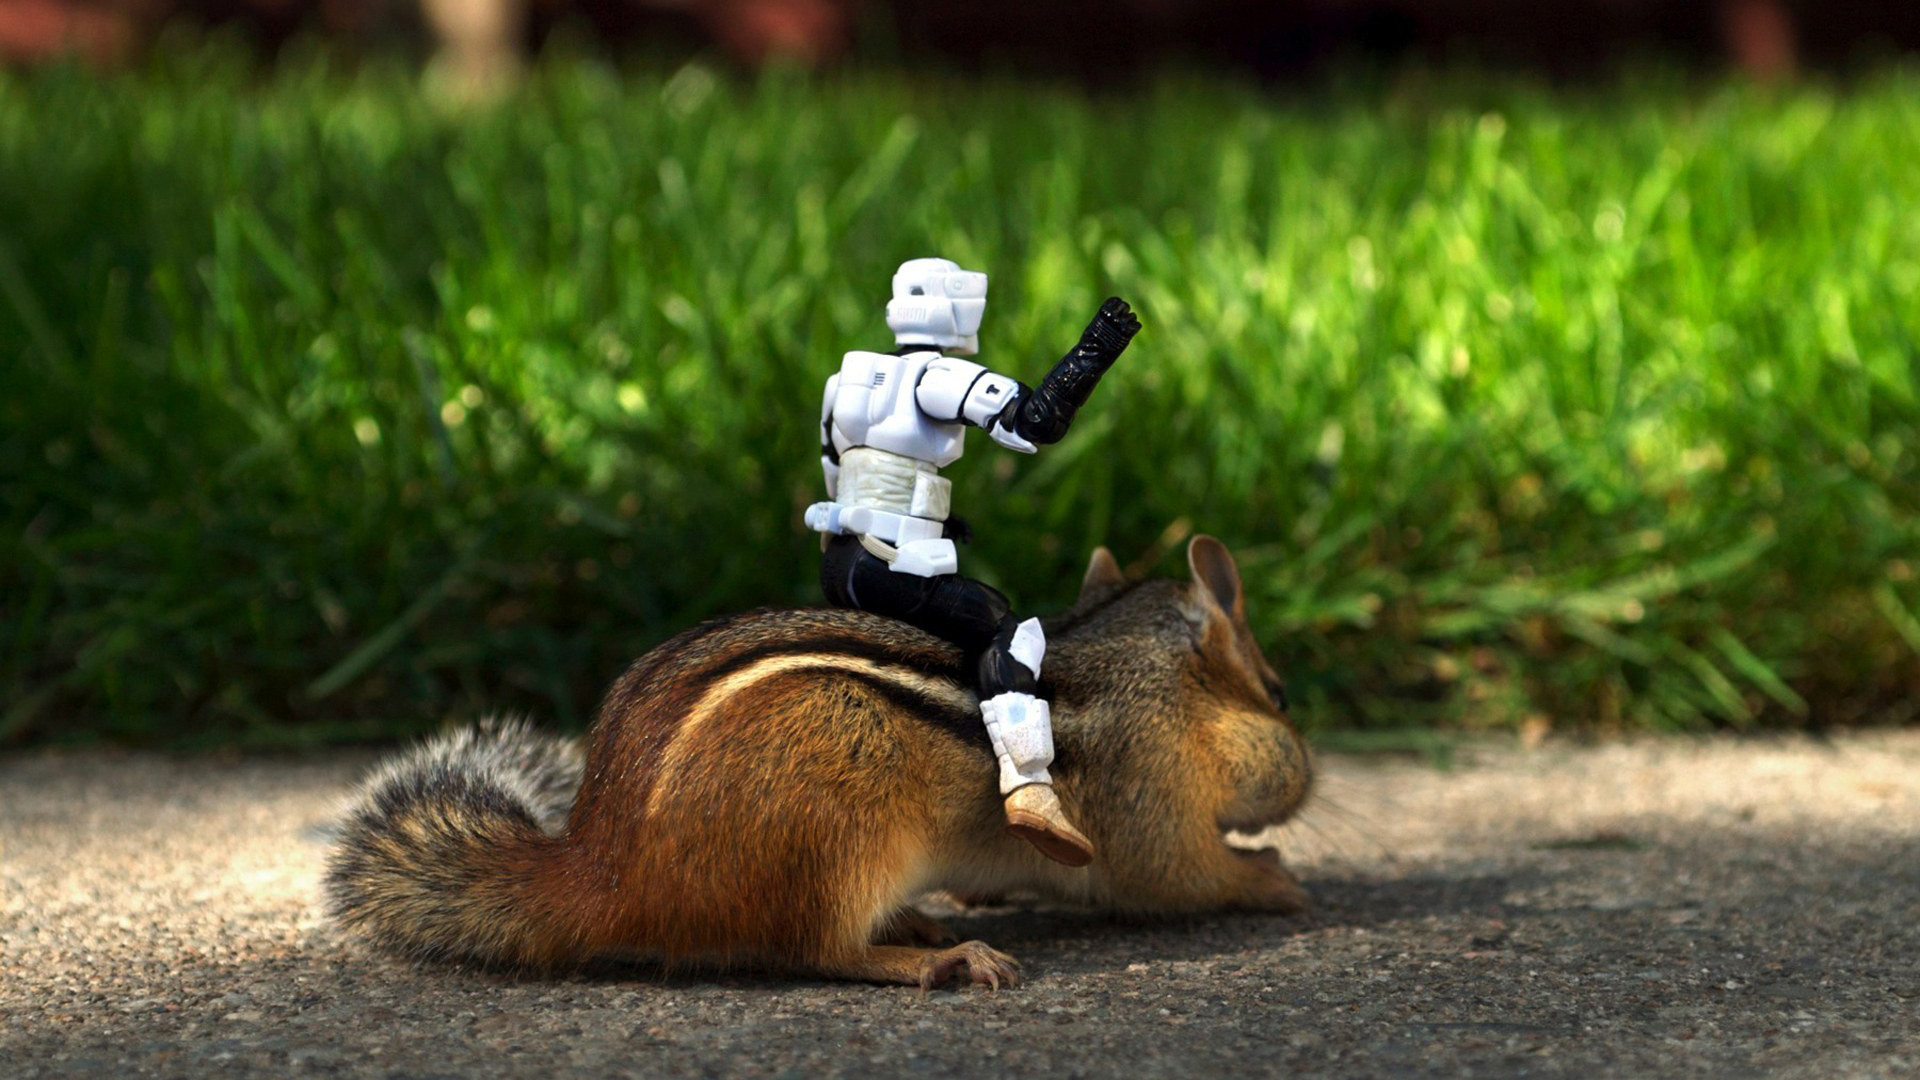 General 1920x1080 animals squirrel Imperial Stormtrooper mammals outdoors toys depth of field blurred blurry background sunlight fur ground